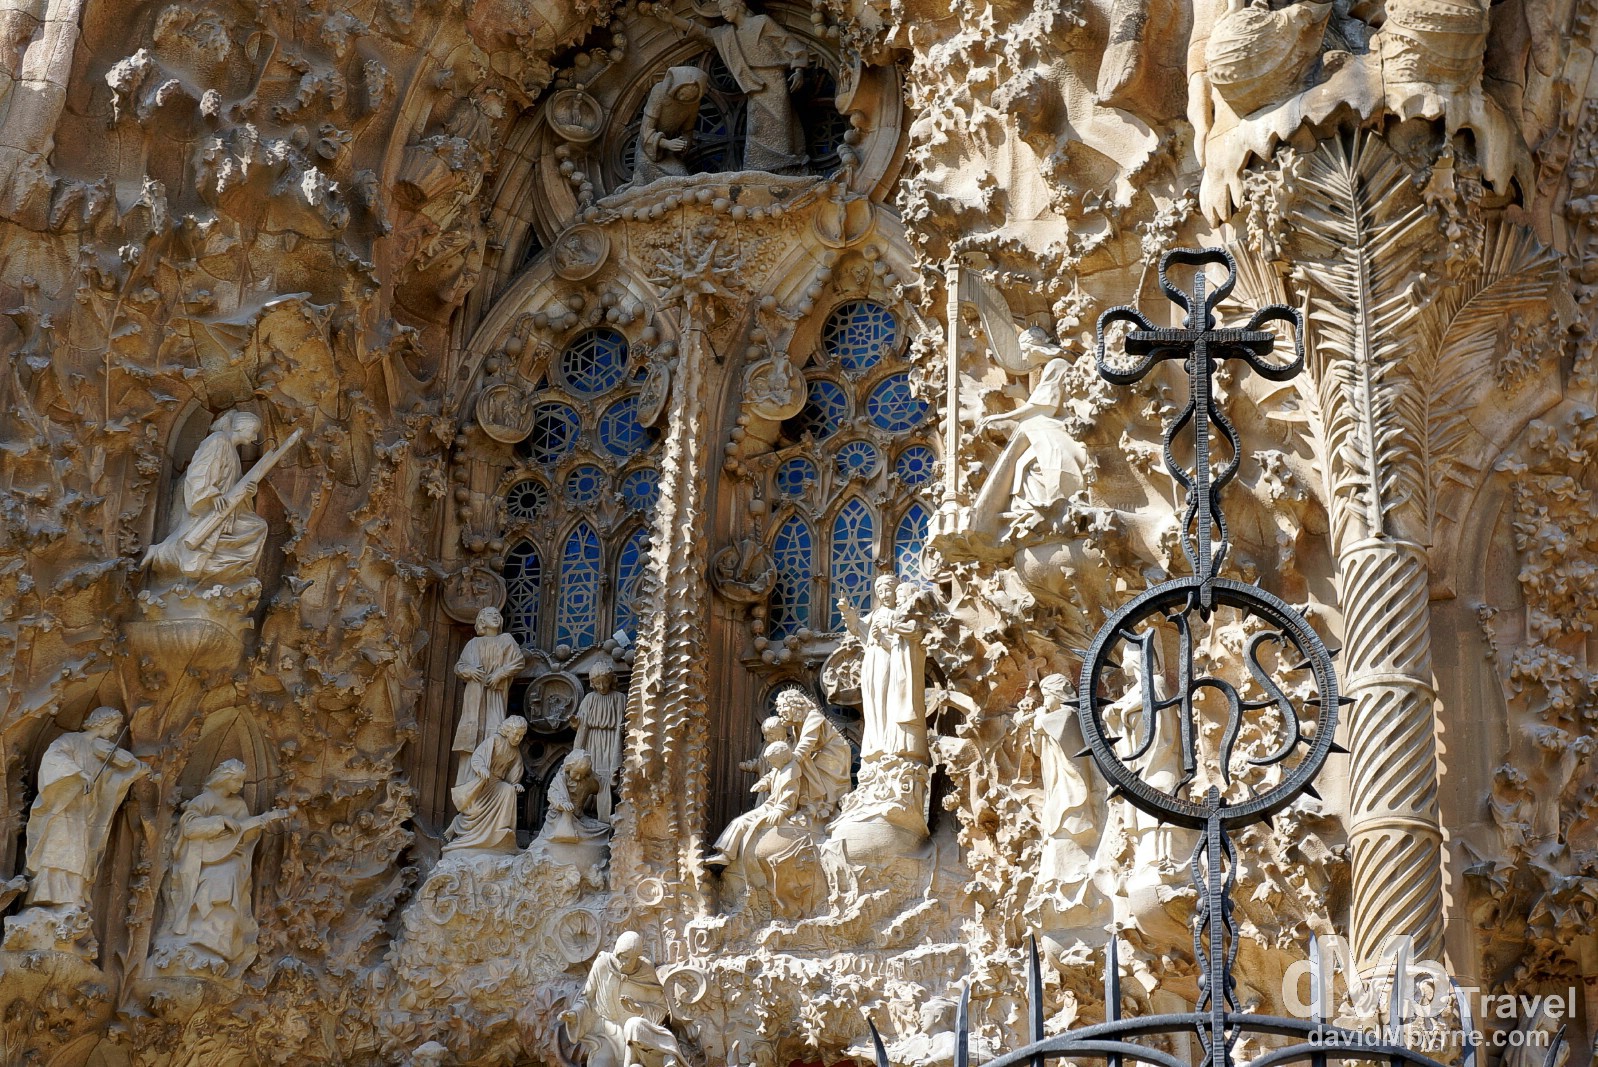 A section of the amazing Nativity facade of the UNESCO-listed Sagrada Familia in Barcelona Spain. June 18th, 2014.